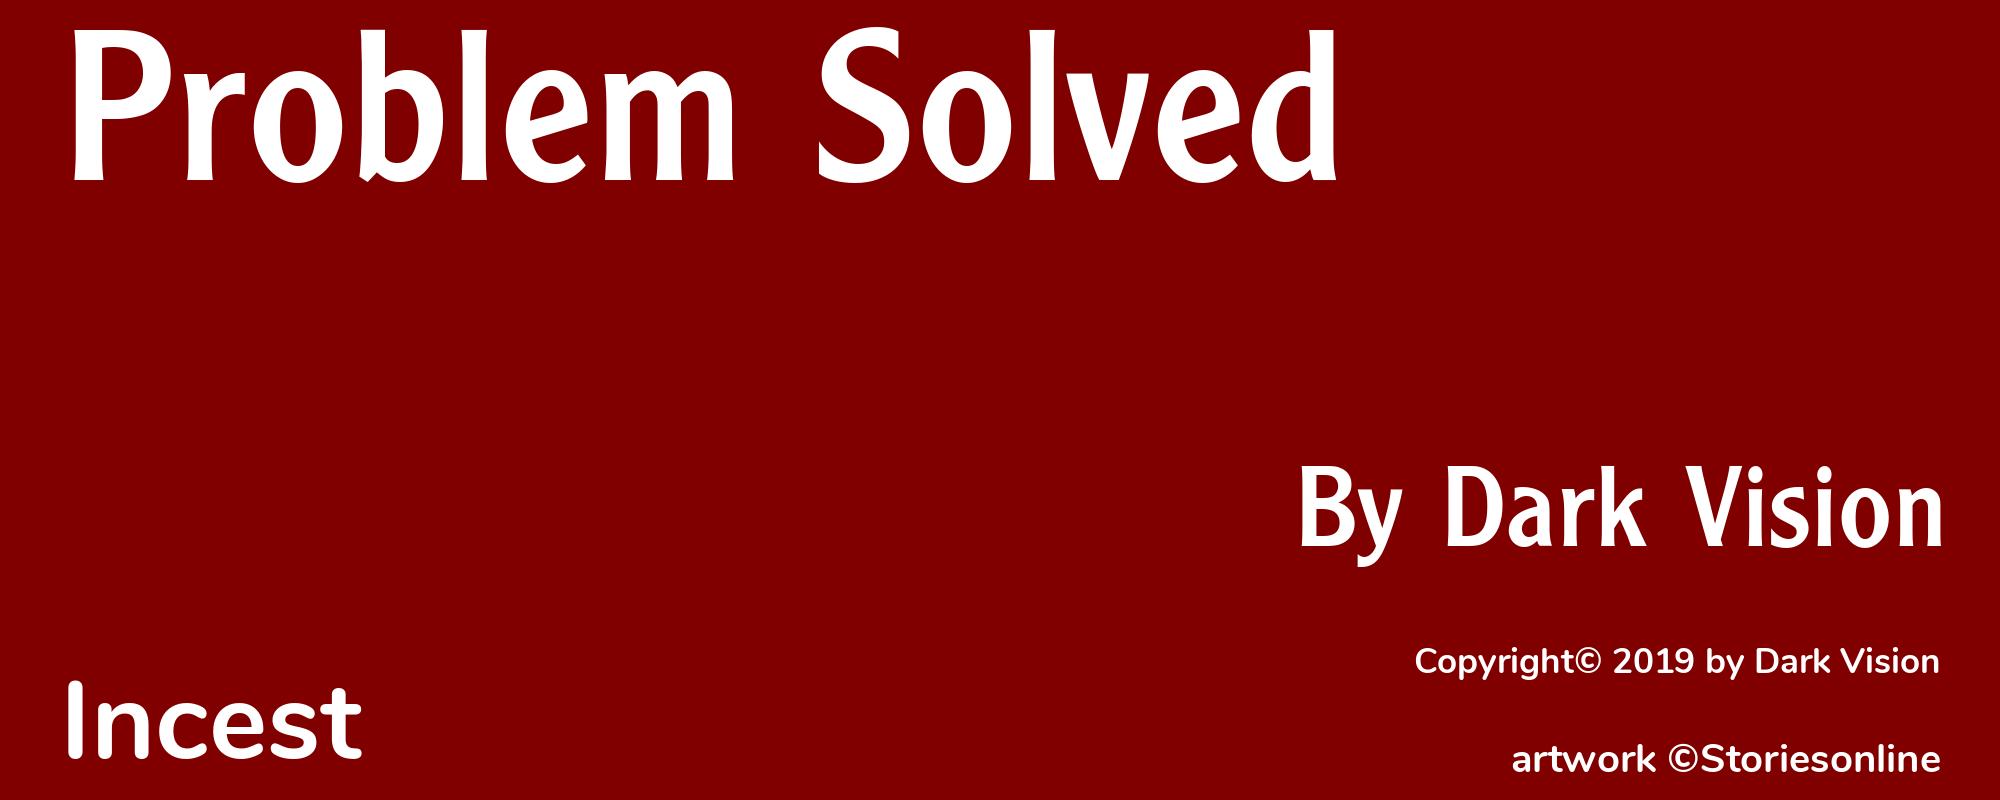 Problem Solved - Cover